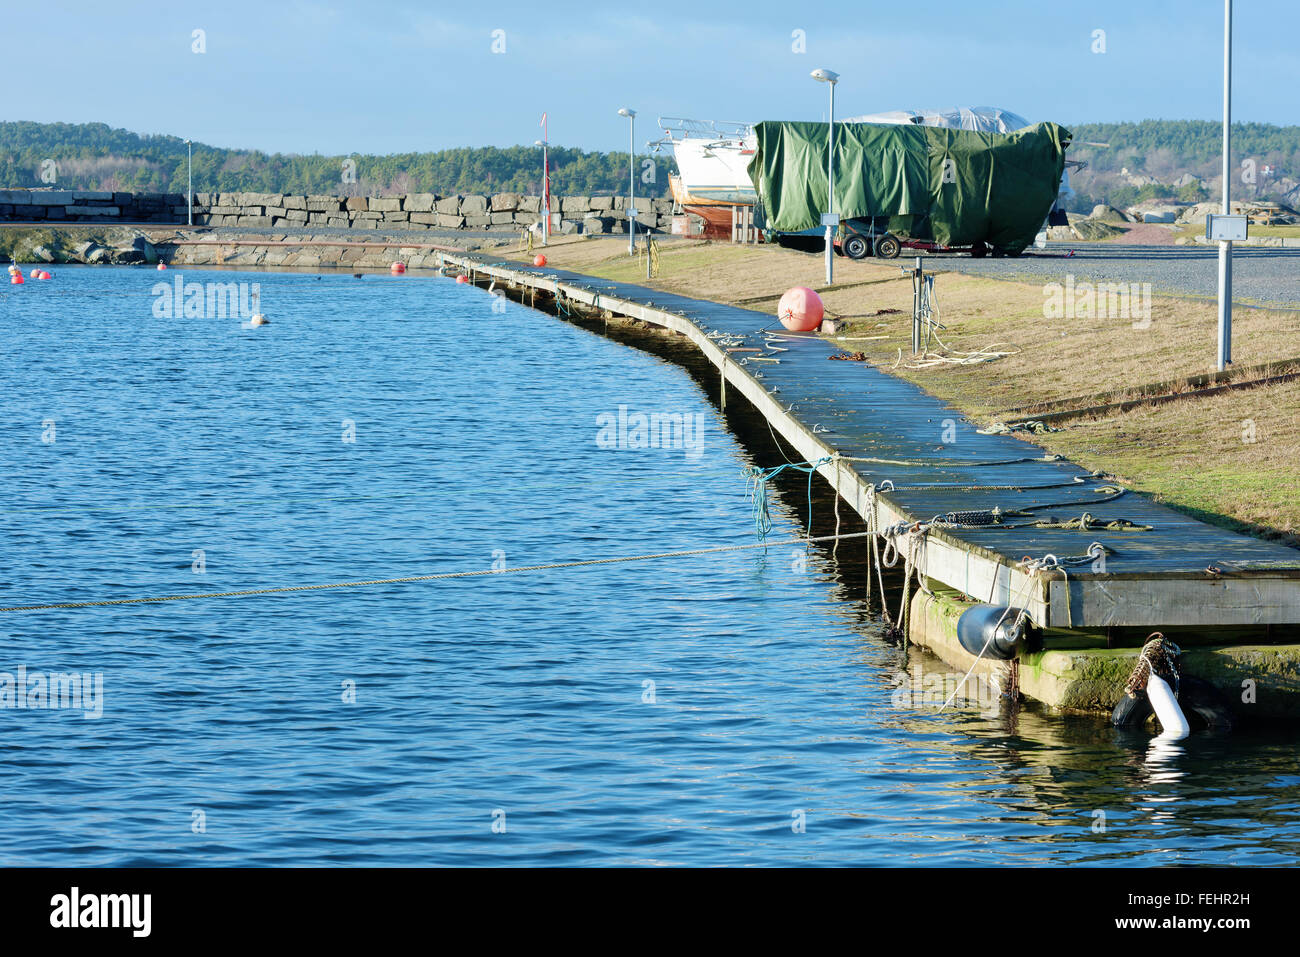 An empty wooden pier and three boats up on land in the distance. A rope is stretched in the foreground out over the water. Stock Photo